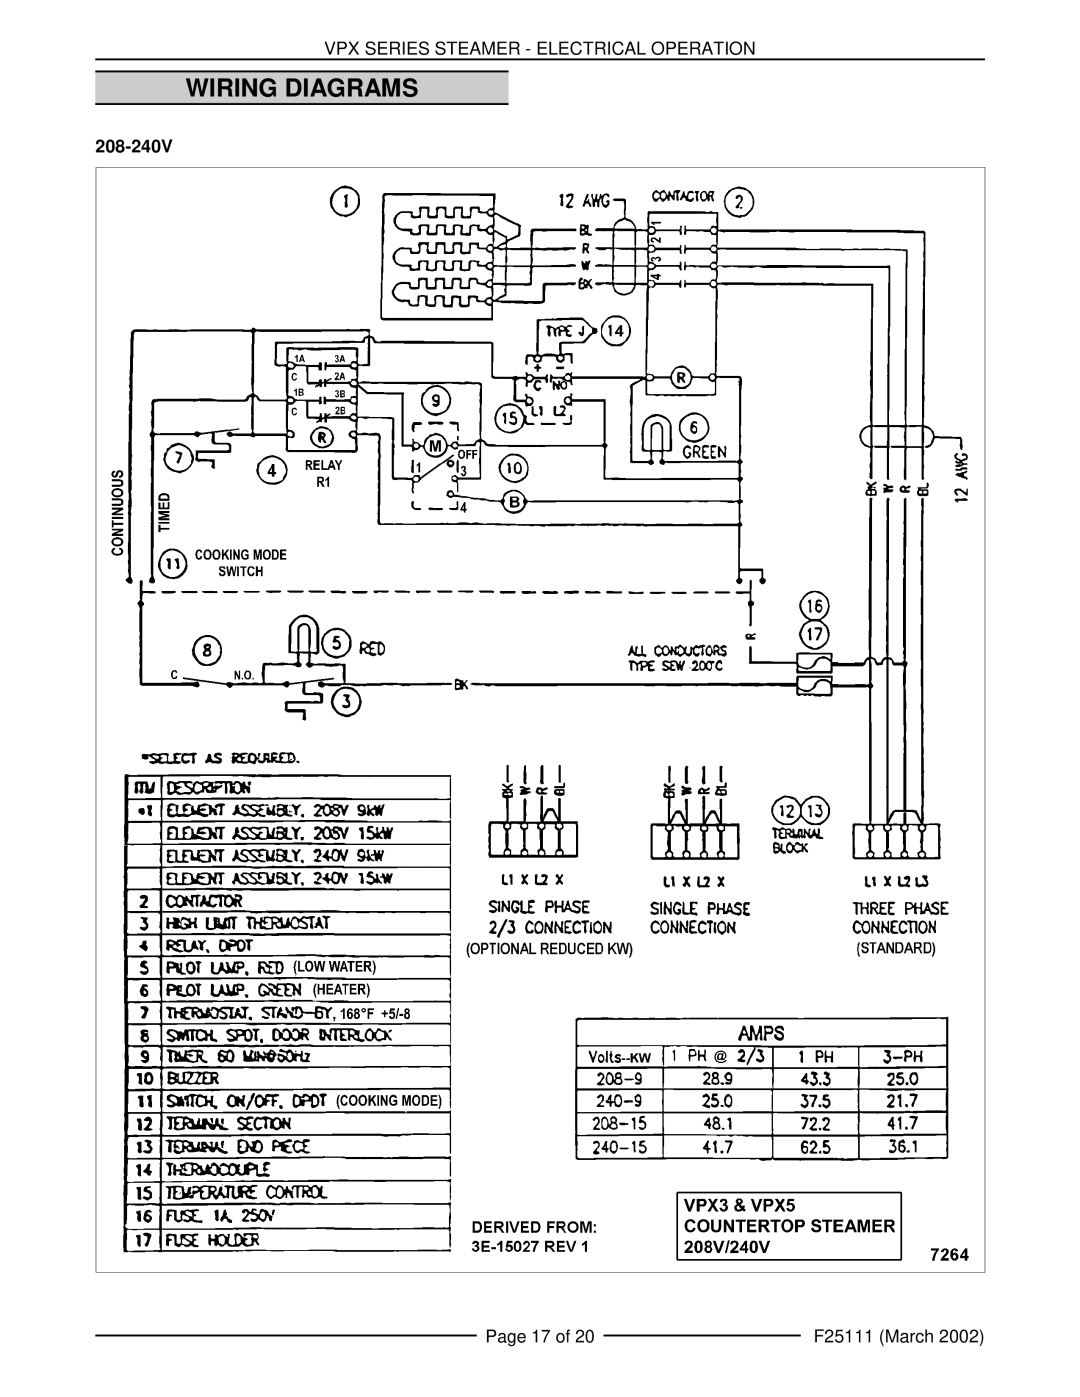 Vulcan-Hart VPX5 126588, VPX3 126586 Wiring Diagrams, Vpx Series Steamer - Electrical Operation, Page 17 of, F25111 March 